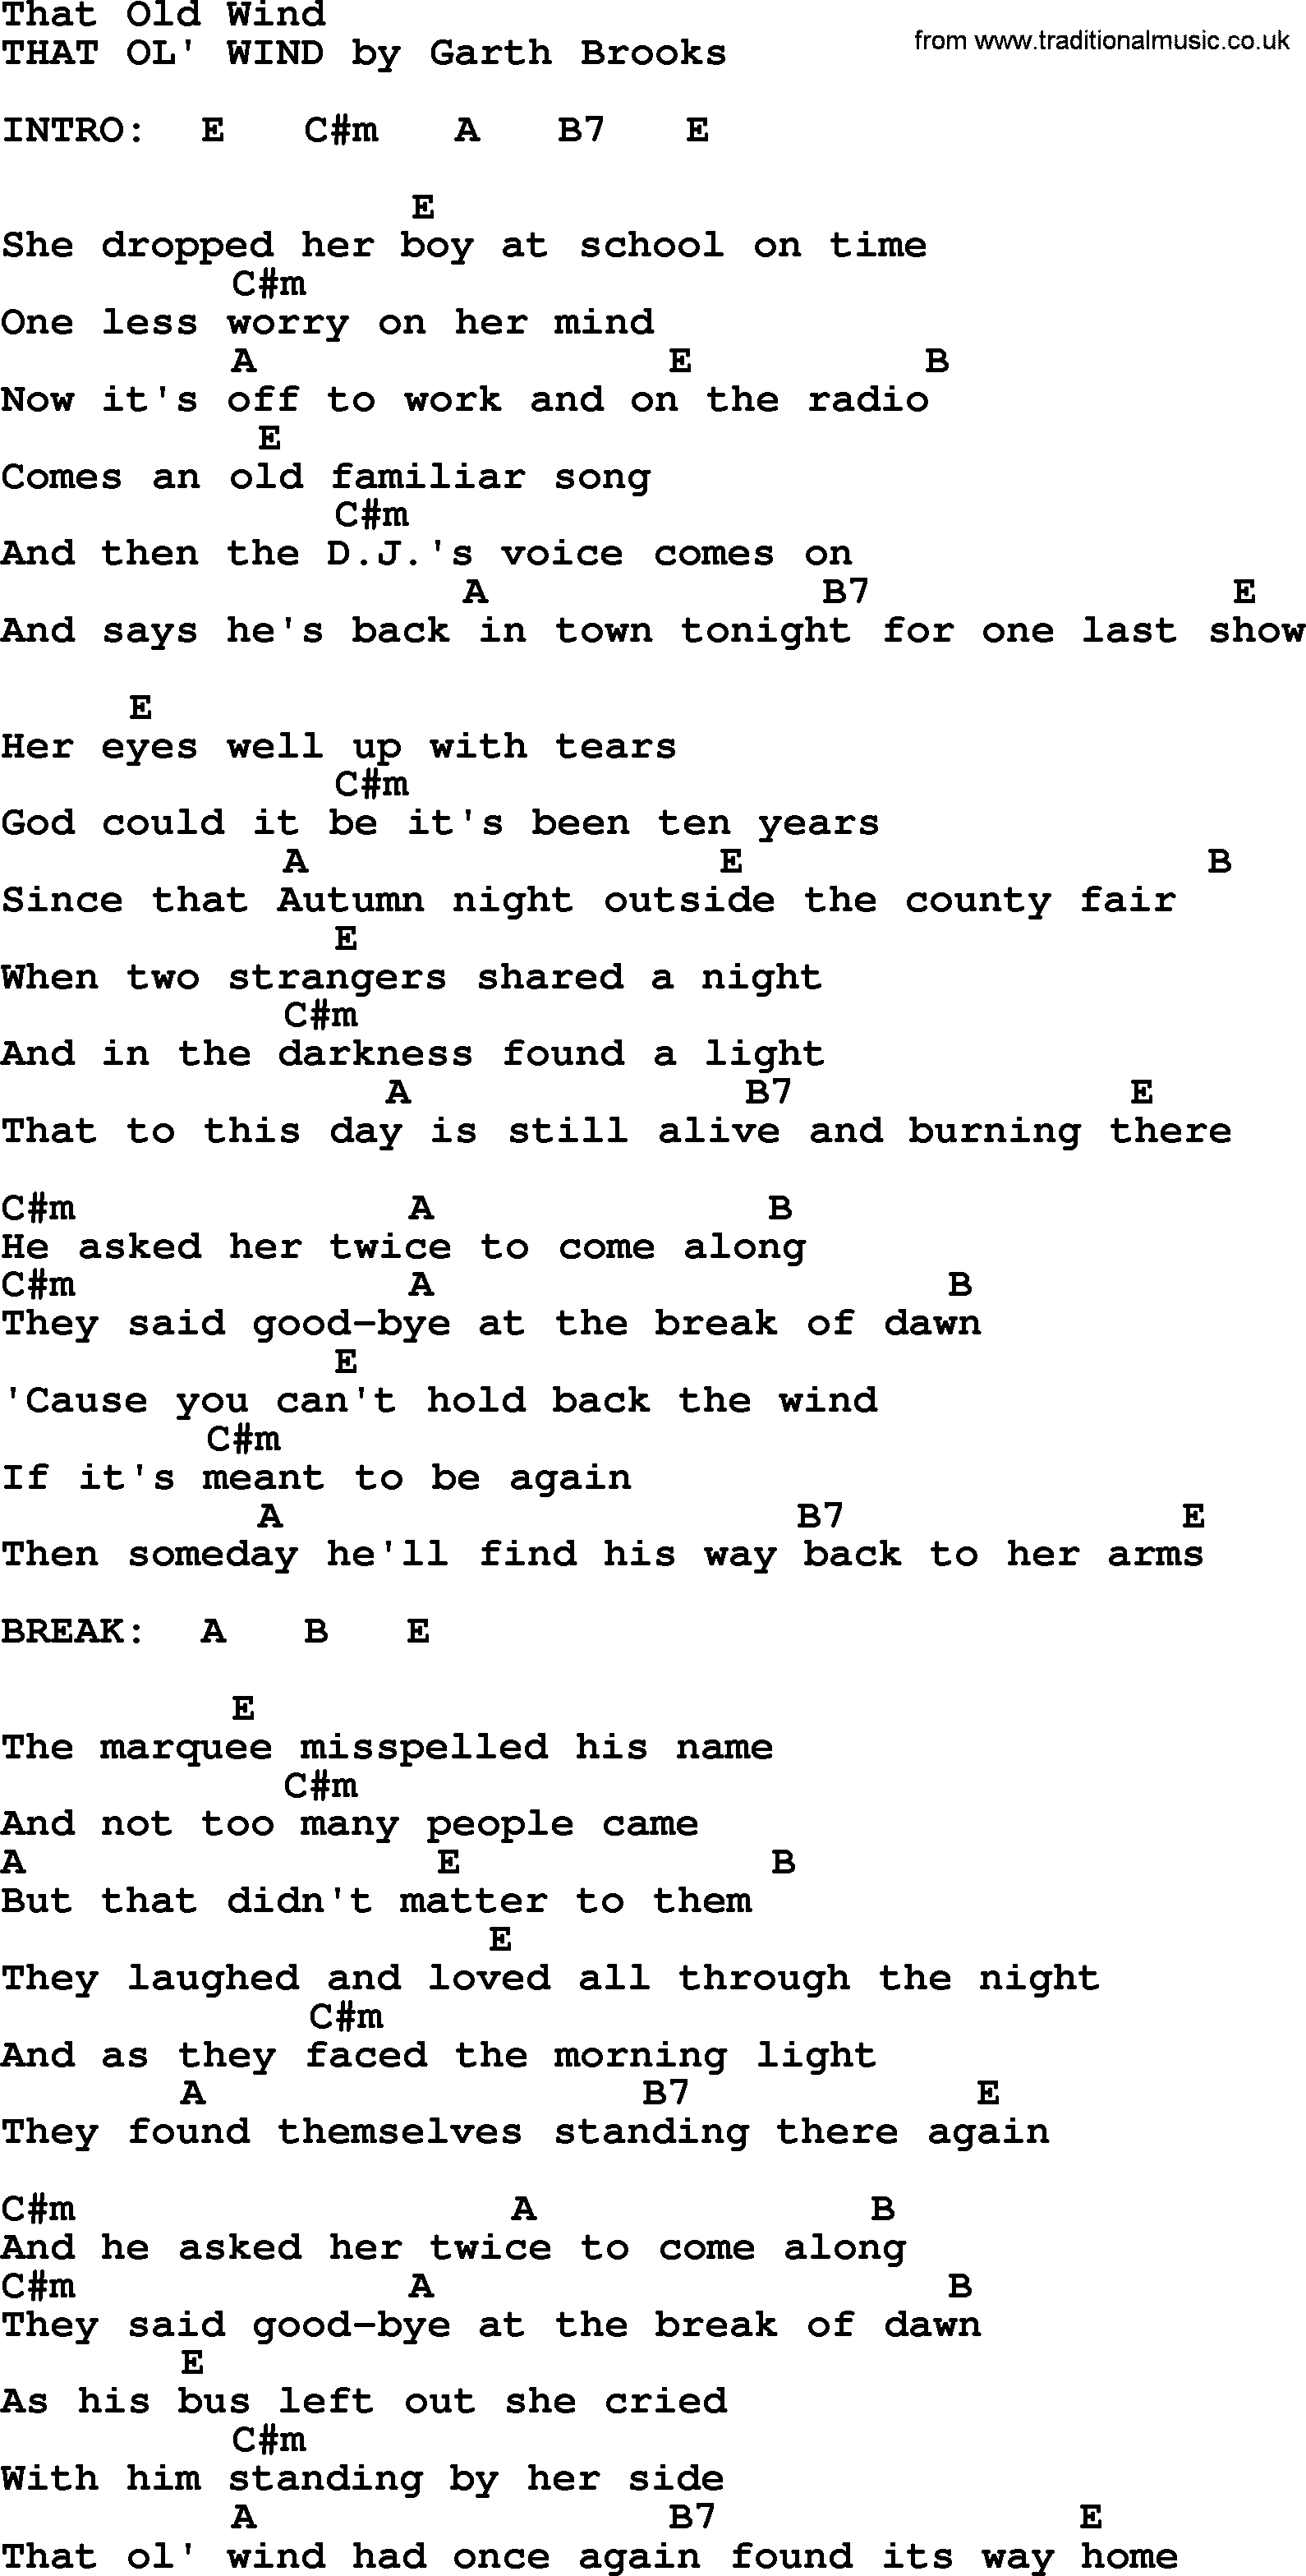 Garth Brooks song: That Old Wind, lyrics and chords